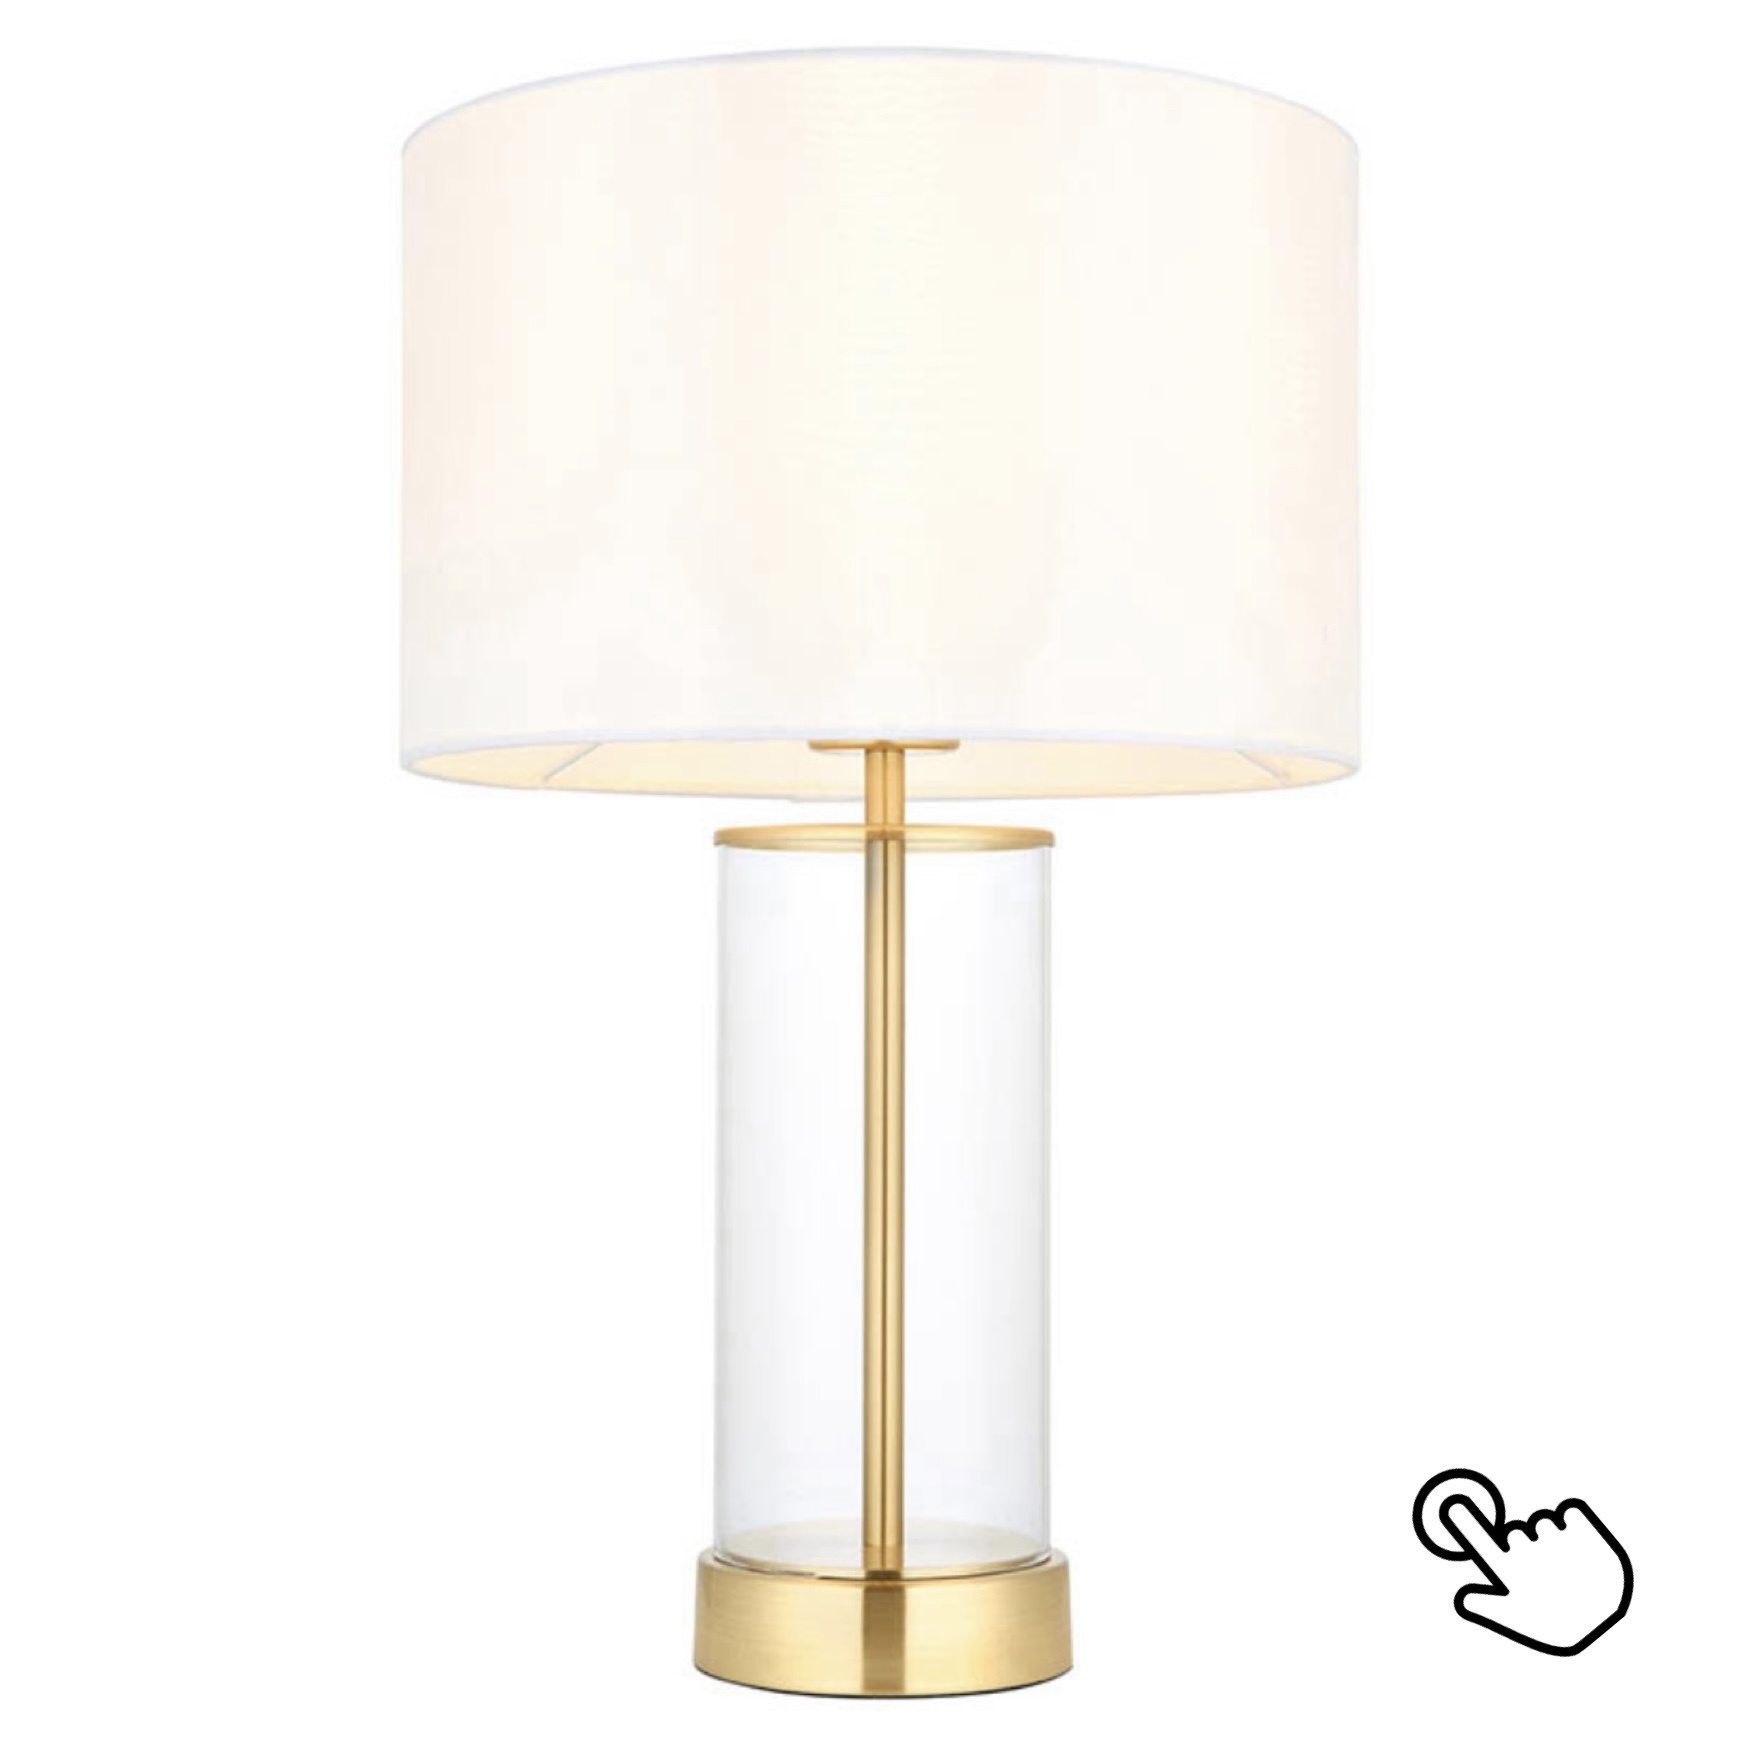 Sina - 3 Stage Touch Table Lamp - Brushed Brass and Vintage White